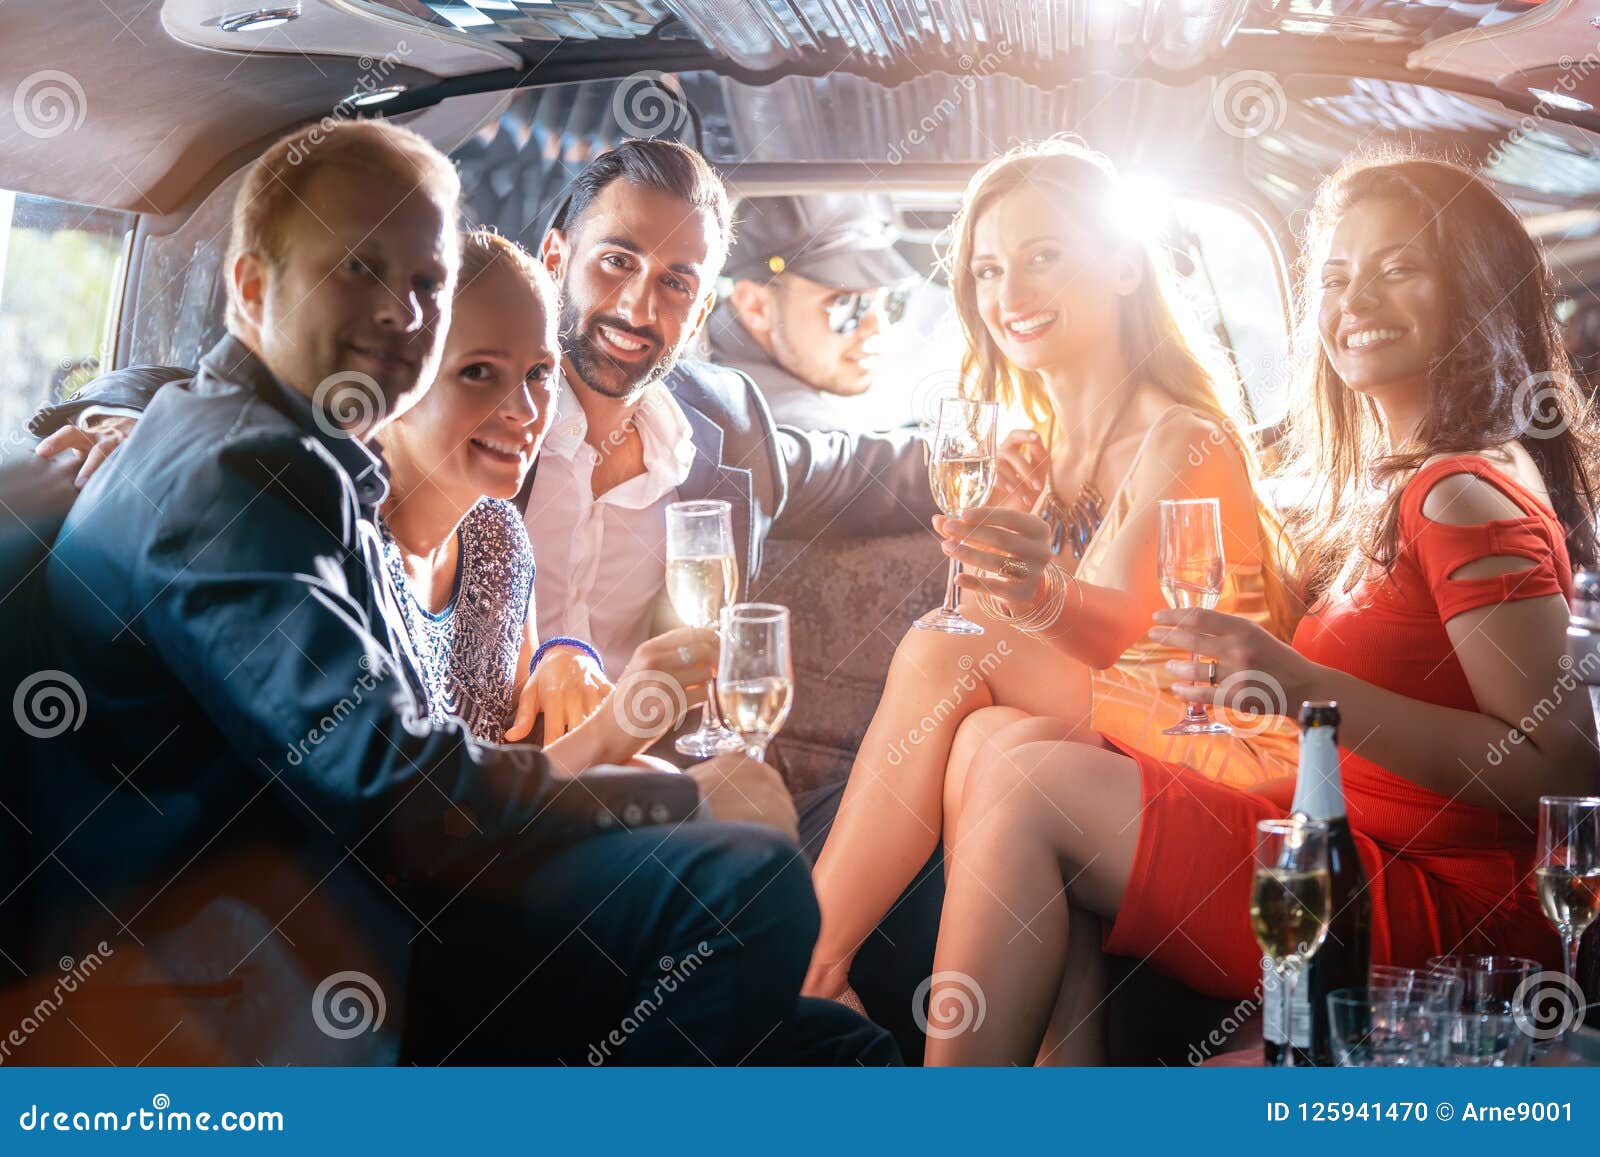 group of party people in a limo drinking